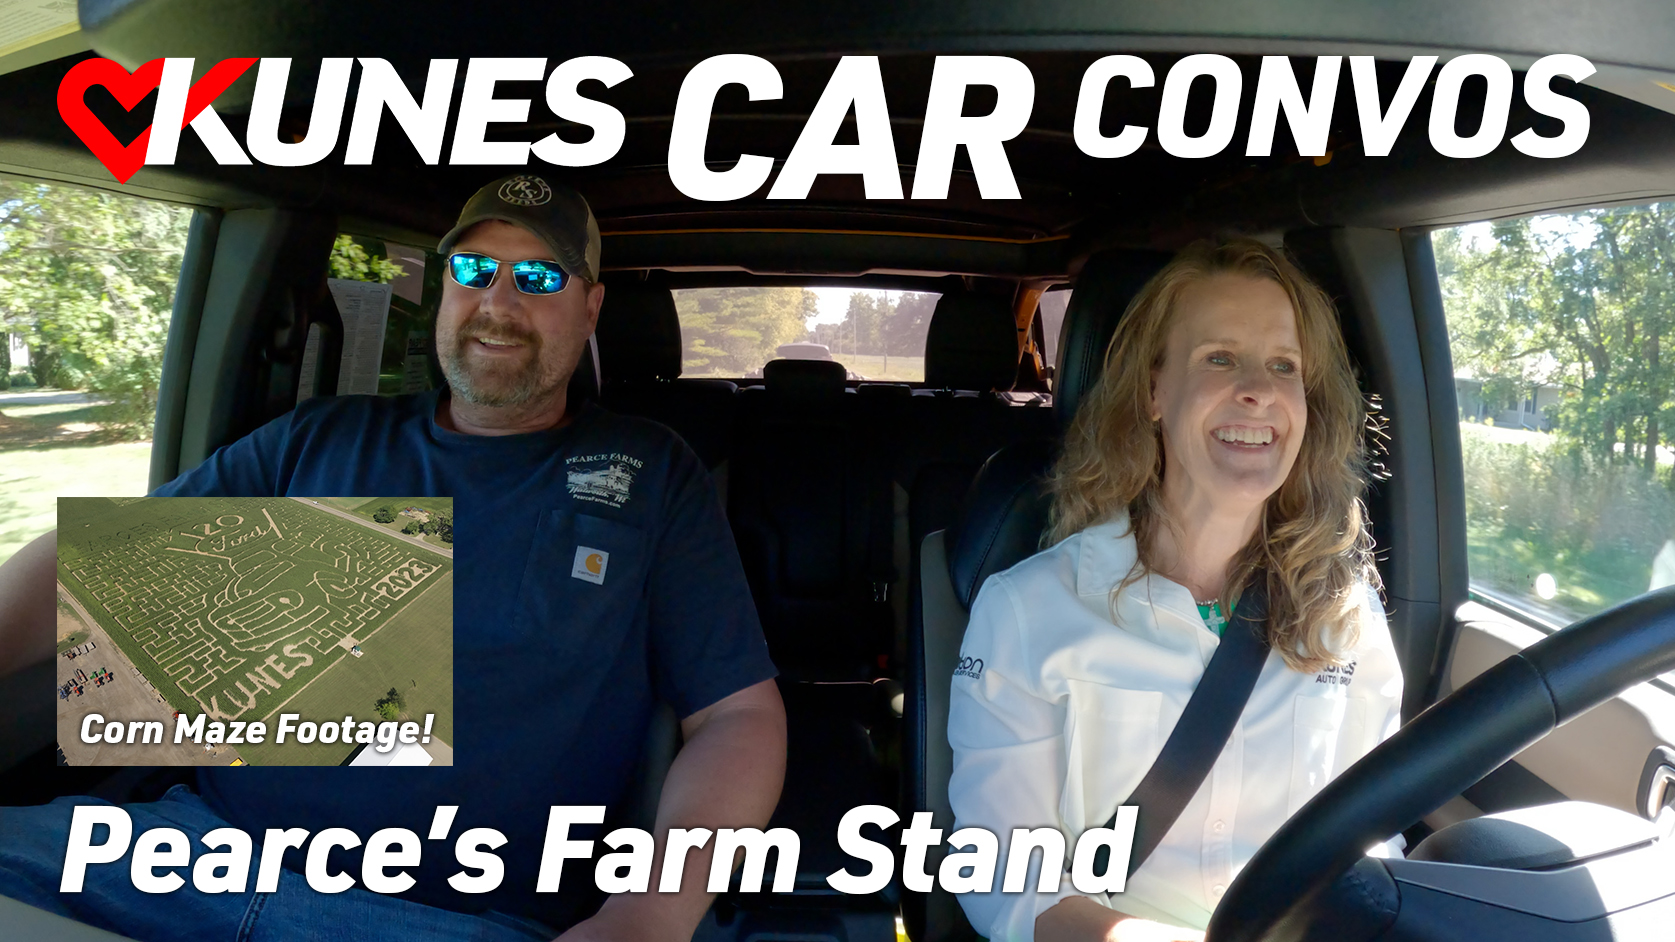 Bob Pearce, Director of Vegetable Production at Pearce's Farm Stand, and Jen Myers, Director of Marketing at Kunes Auto & RV Group, riding in the 2022 Ford Bronco Wildtrak together; small image of Pearce's 2023 corn maze in bottom left corner; text reads: Kunes Car Convos; Corn Maze Footage; Pearce's Farm Stand